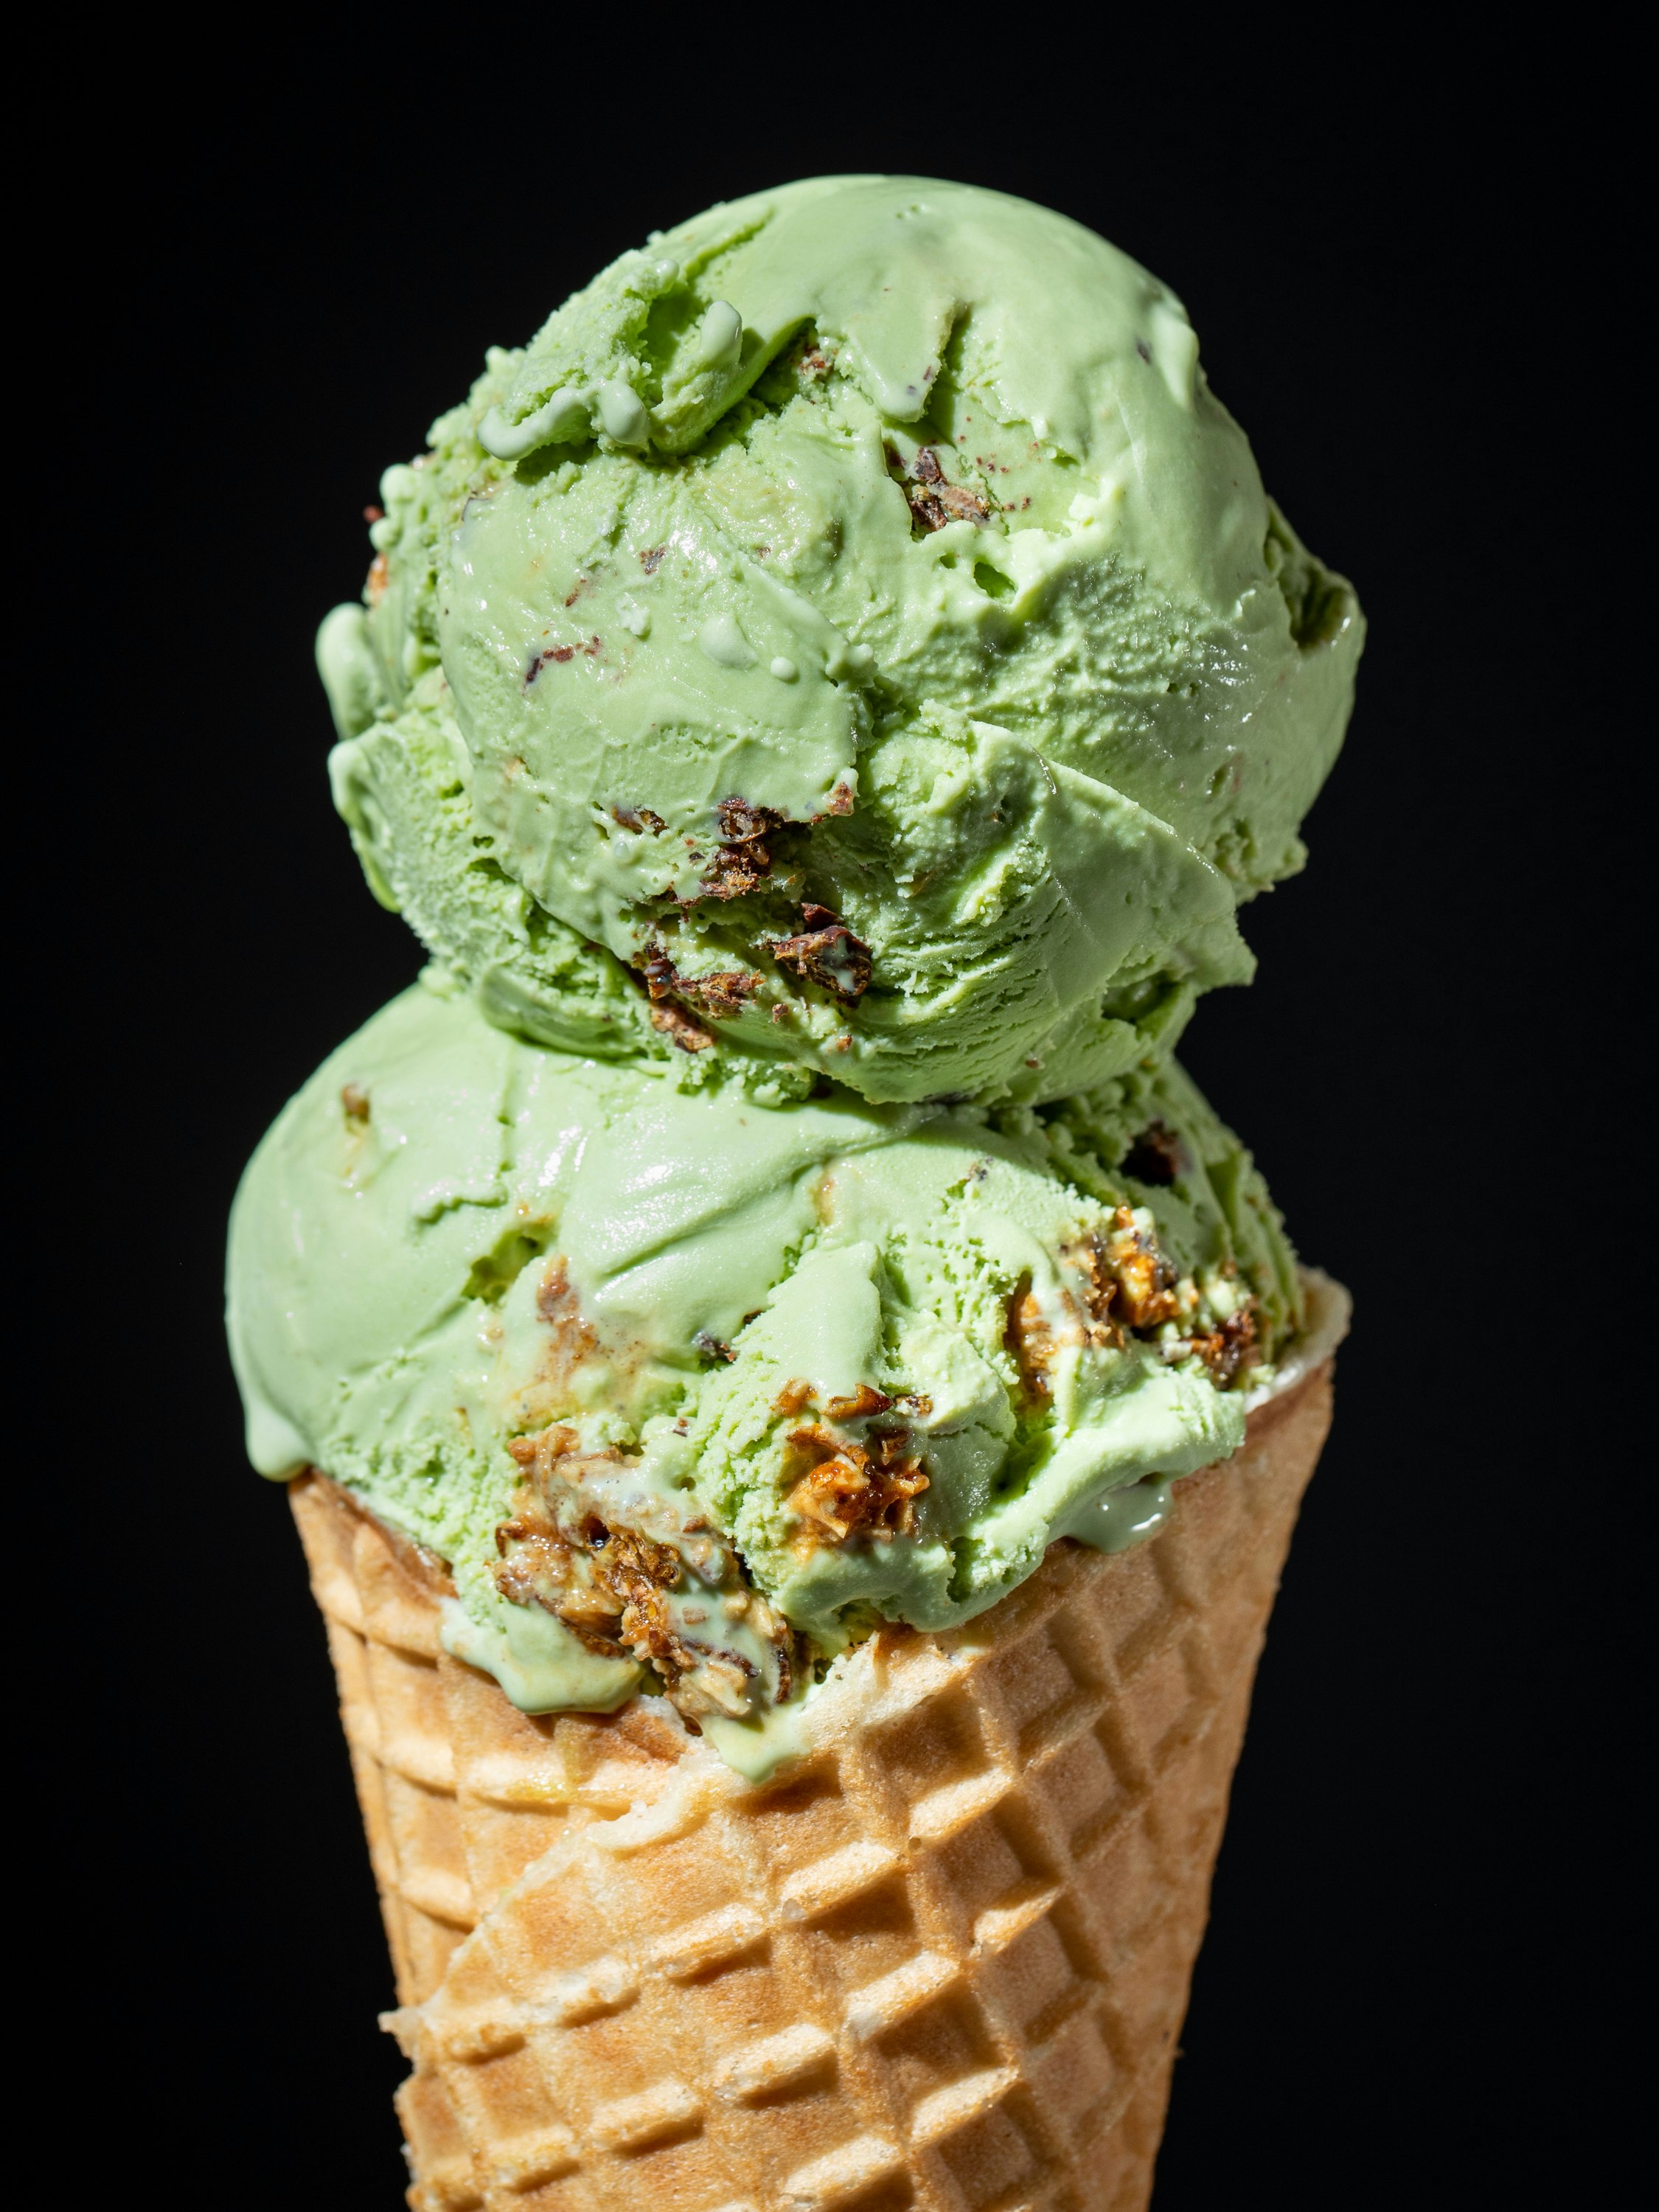 Two scoops of green-colored ice cream on a waffle cone. If you look closely, you can see chunks of chocolate-covered crickets. 